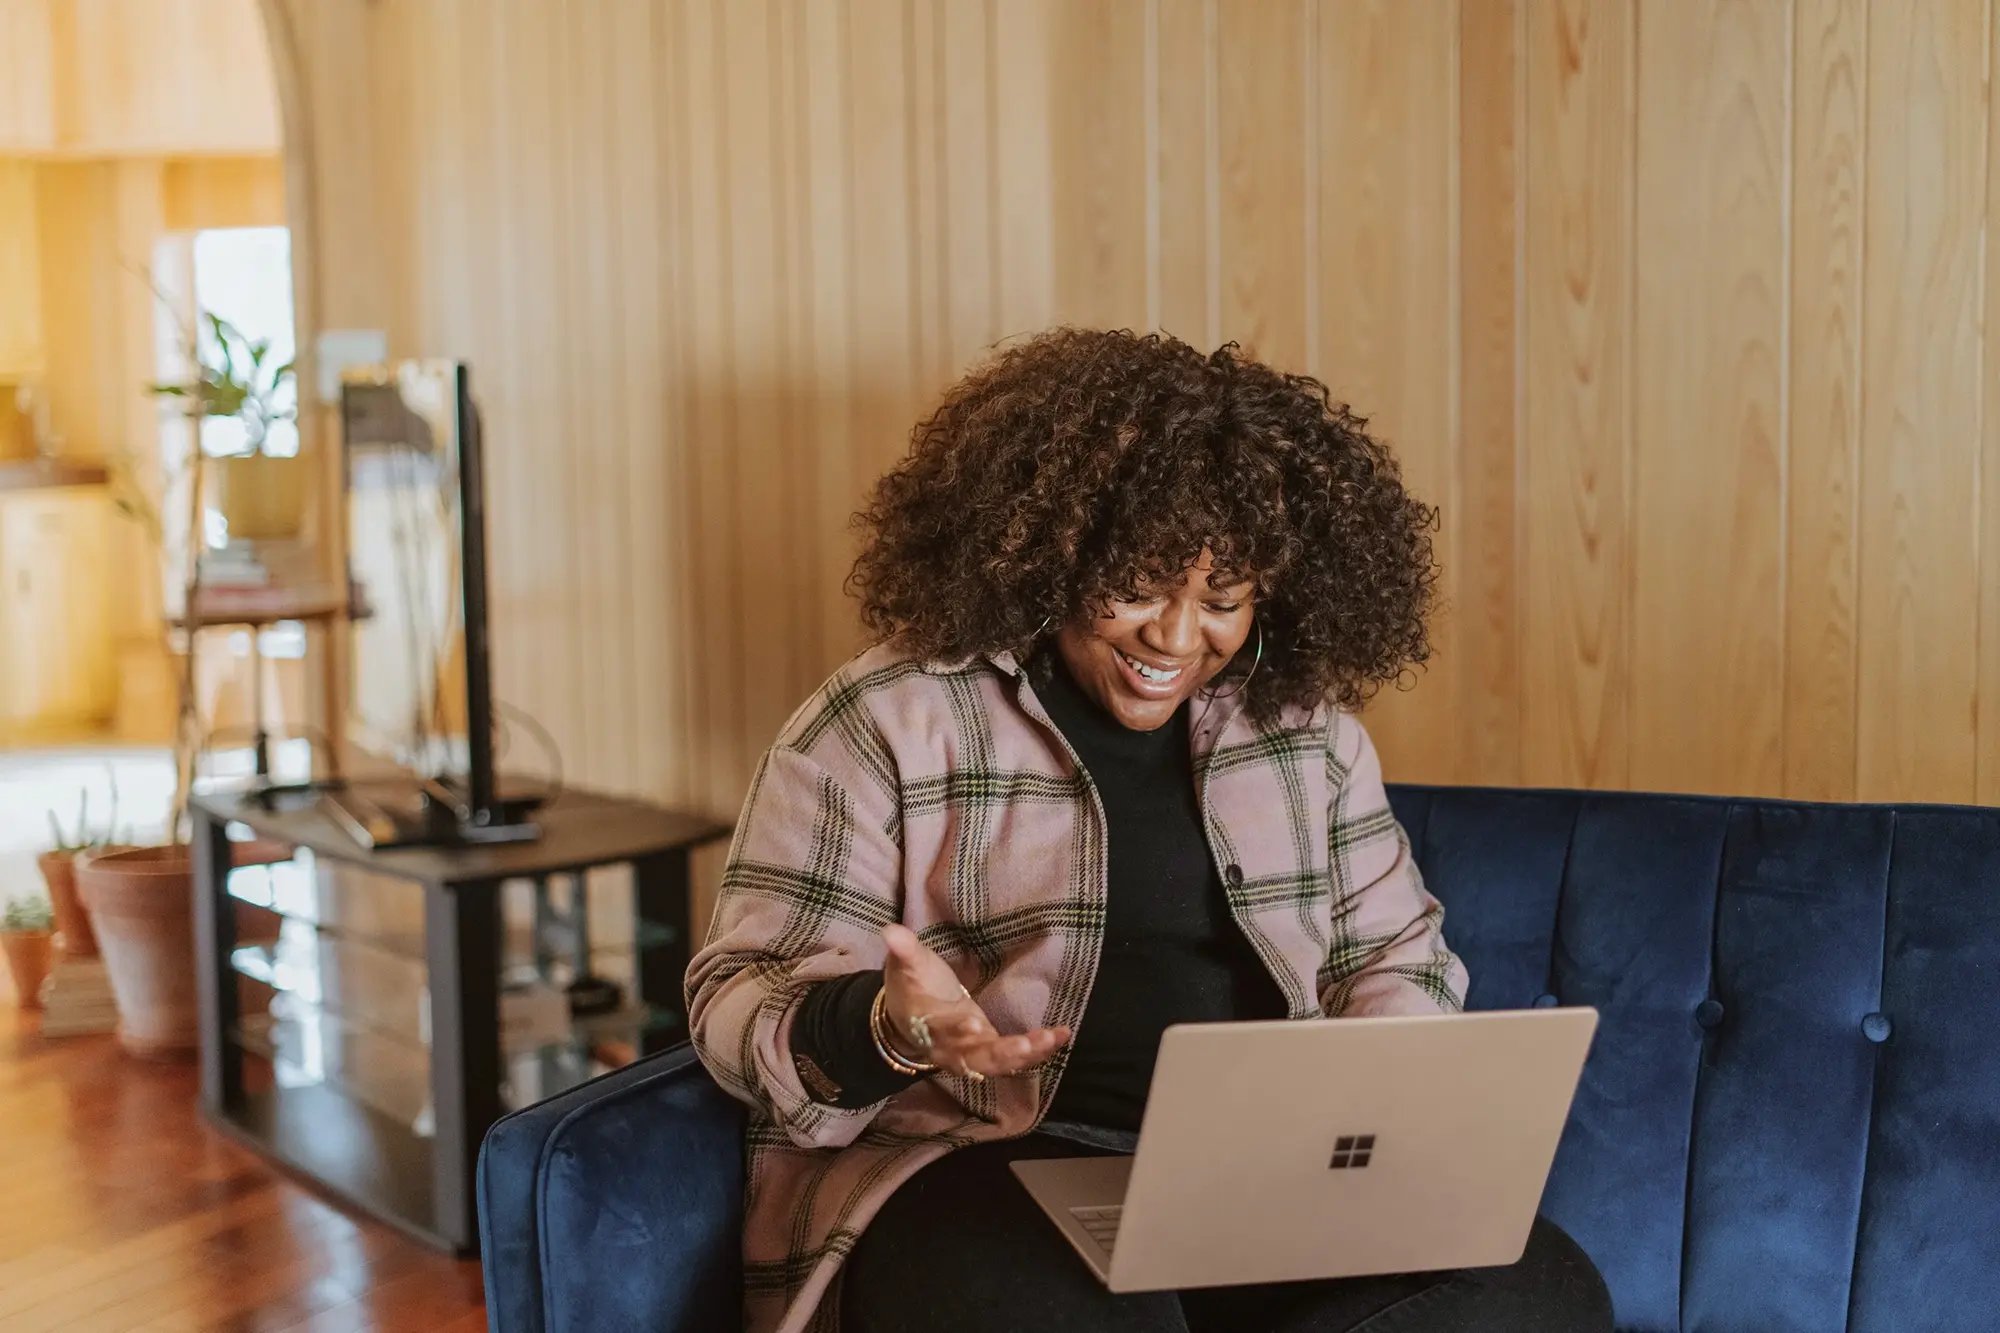 Mixed race women sits on a sofa looking at a laptop. She is smiling and gesturing as if having a conversion